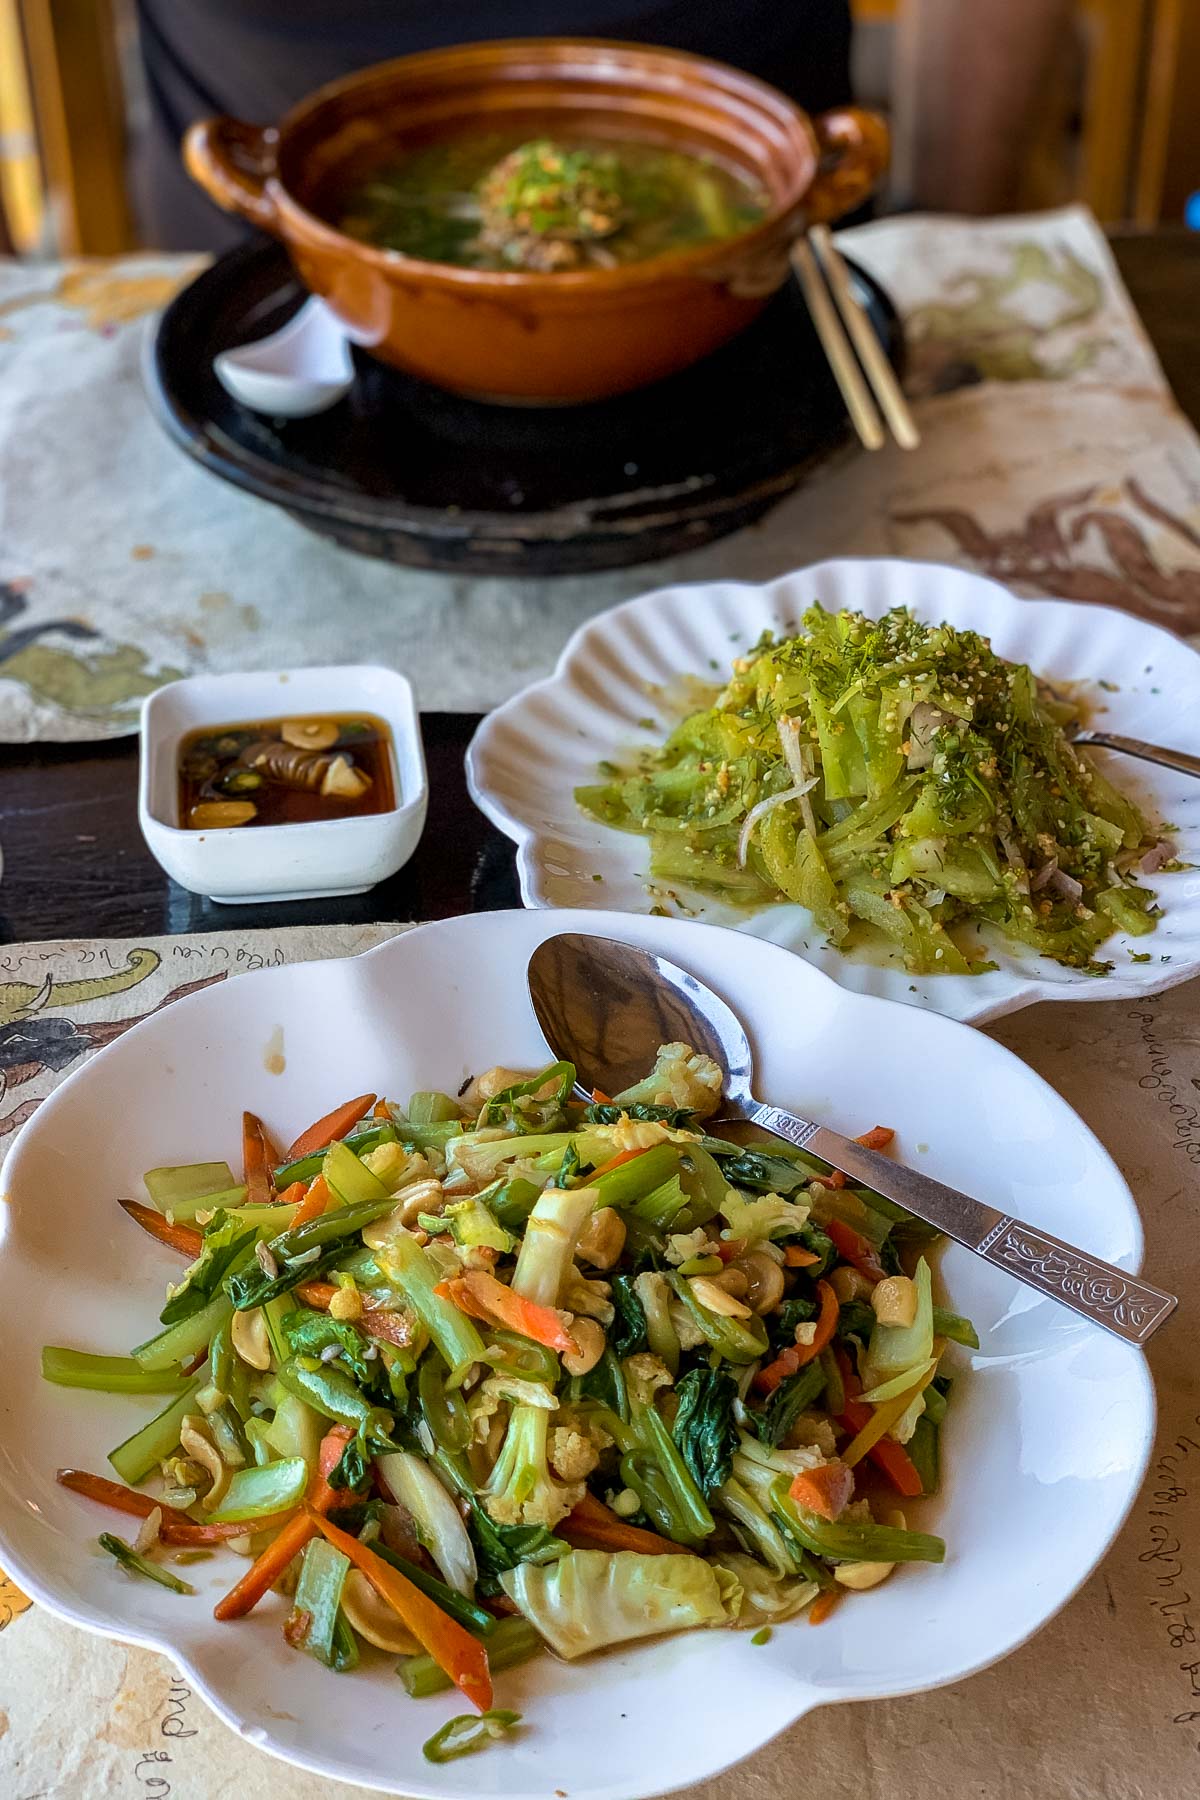 Lunch at Golden Moon Restaurant in Inle Lake